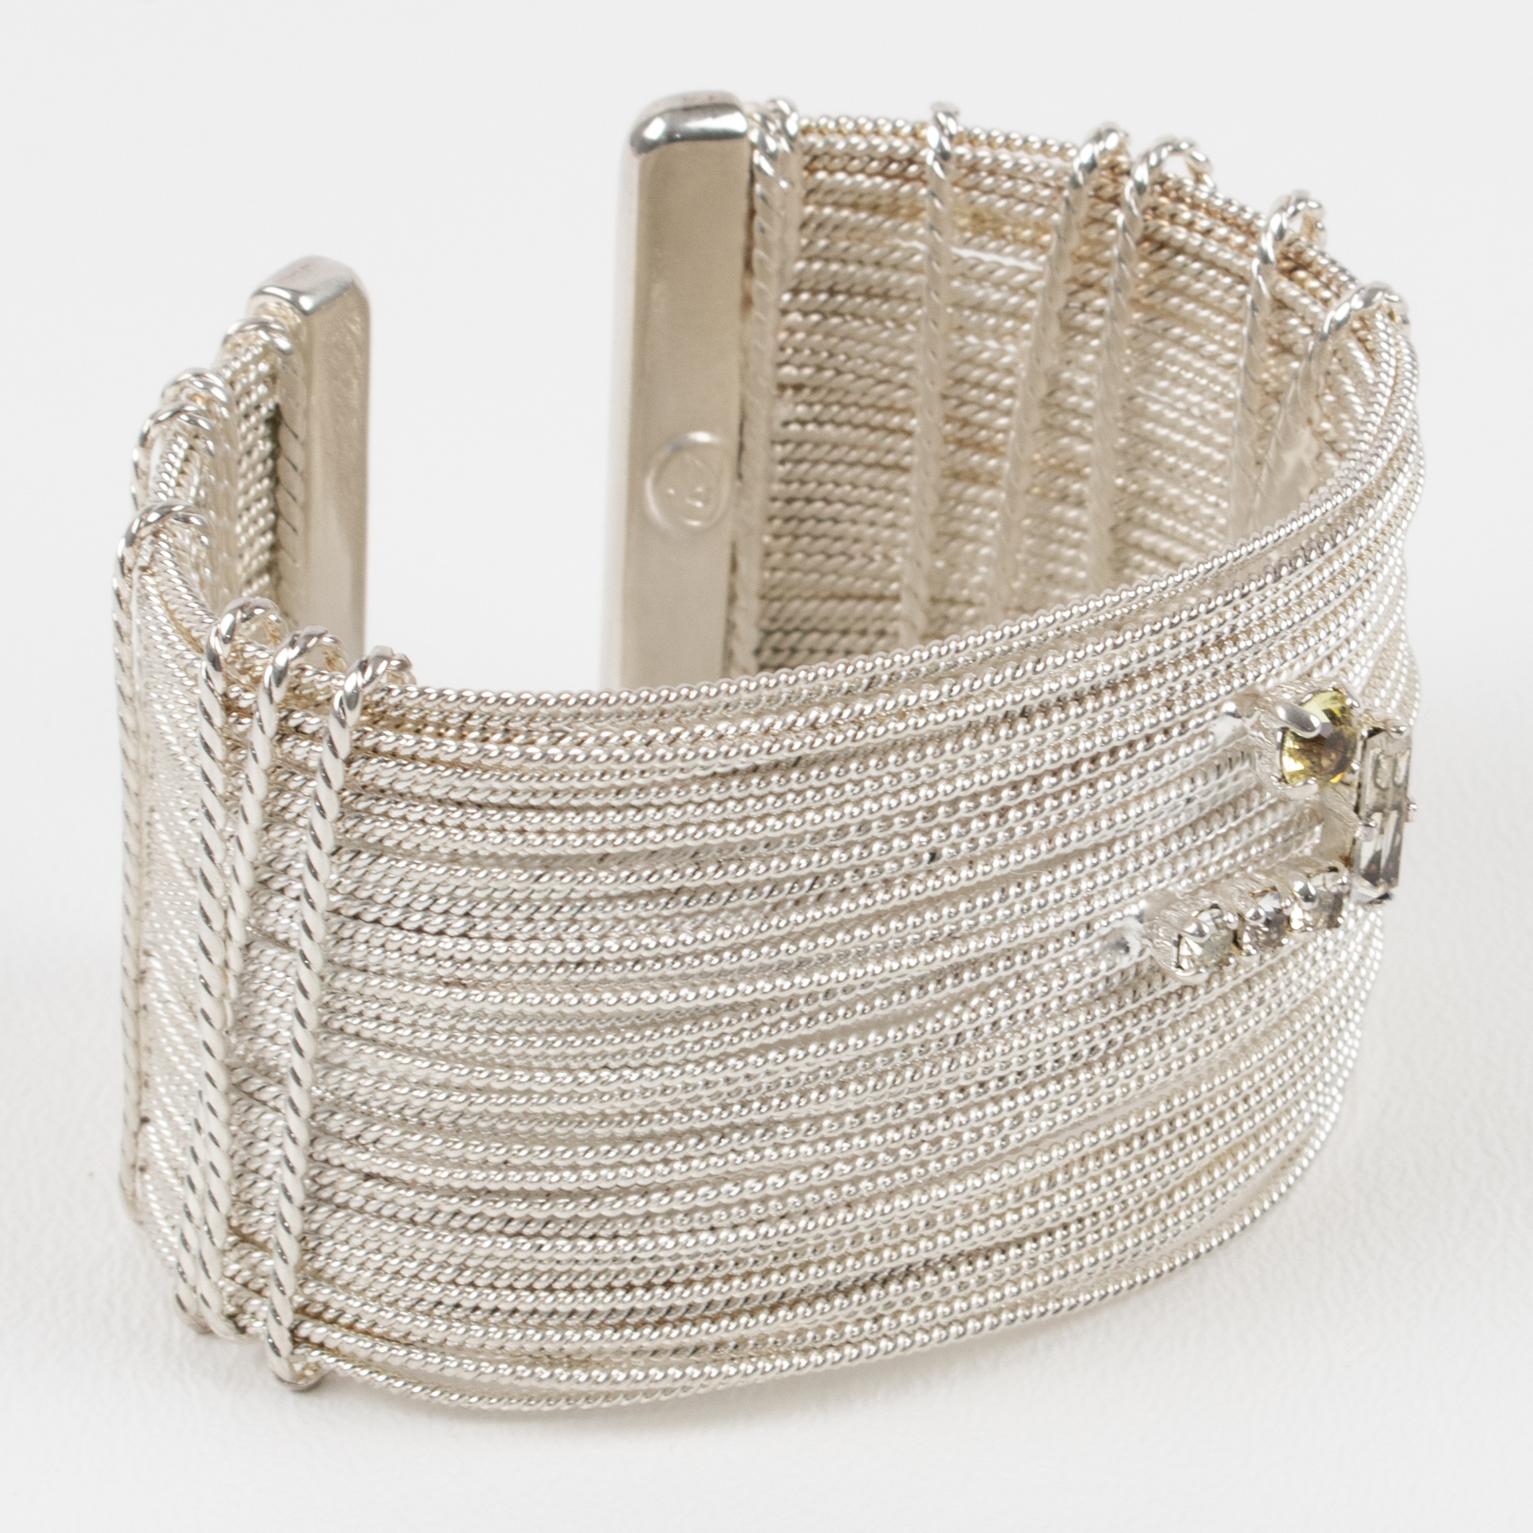 This sculptural Christian Lacroix Paris bracelet bangle features a silver-plate cuff shape with a multi-wire design ornate with larger metal ropes on the sides and embellished with a 